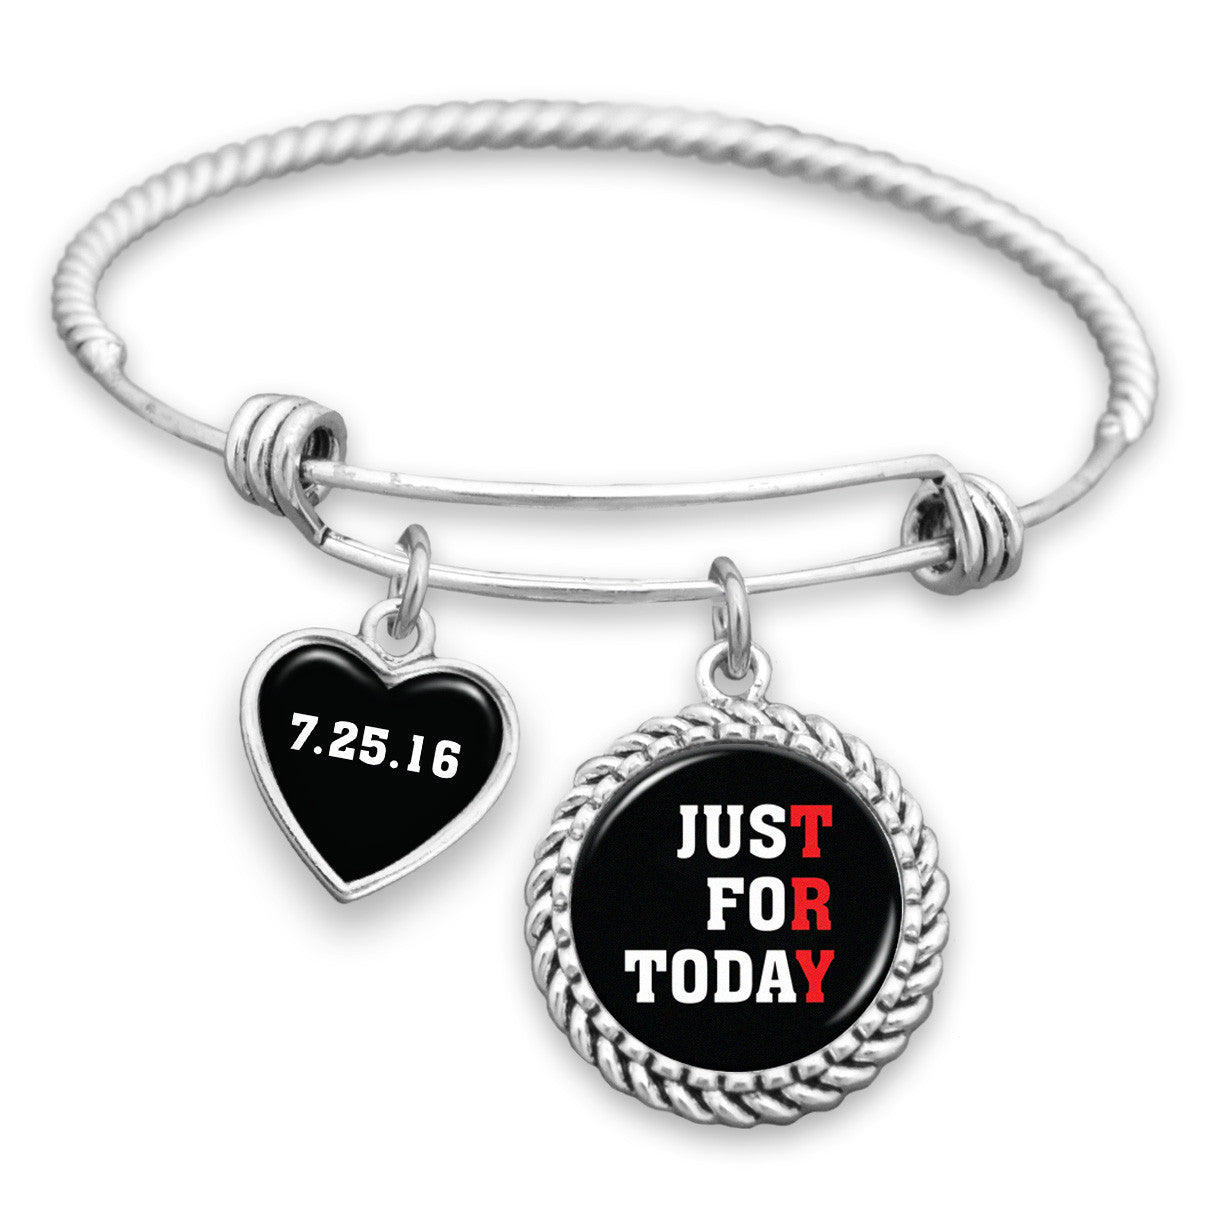 Just For Today Personalized Sobriety Date Charm Bracelet